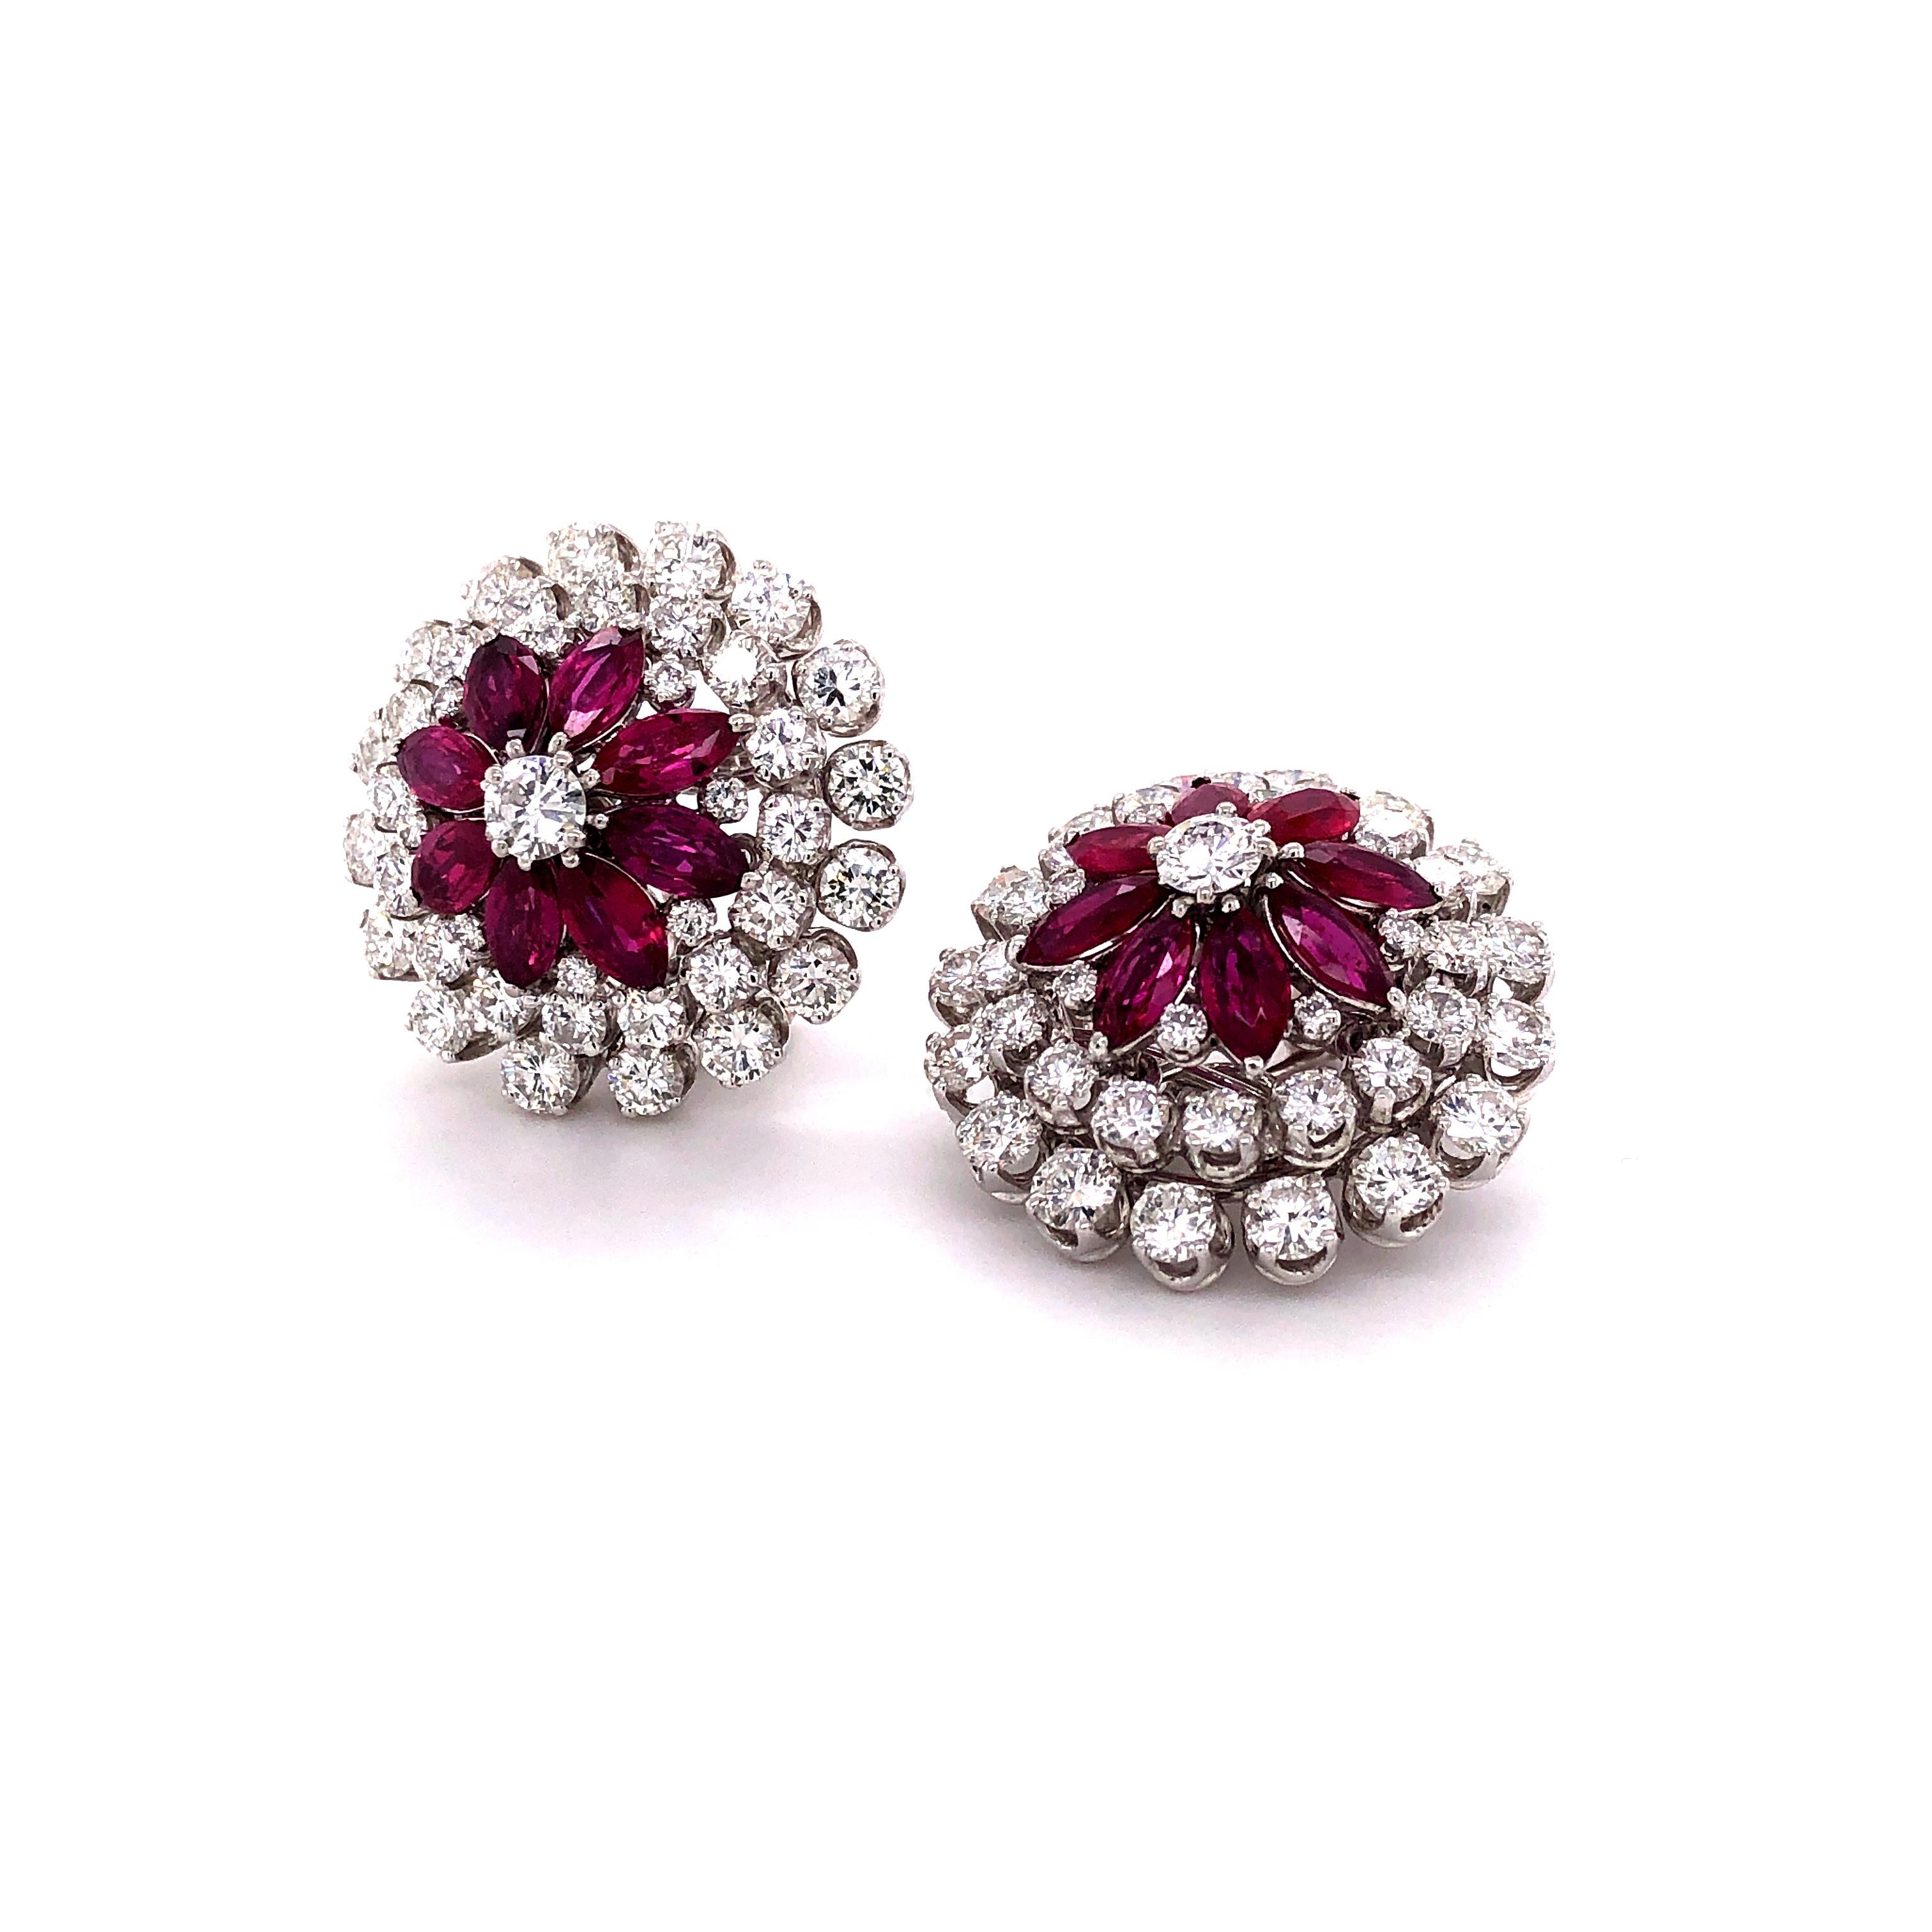 Marquise Cut Ruby Diamond Flower Earclips in Platinum 950